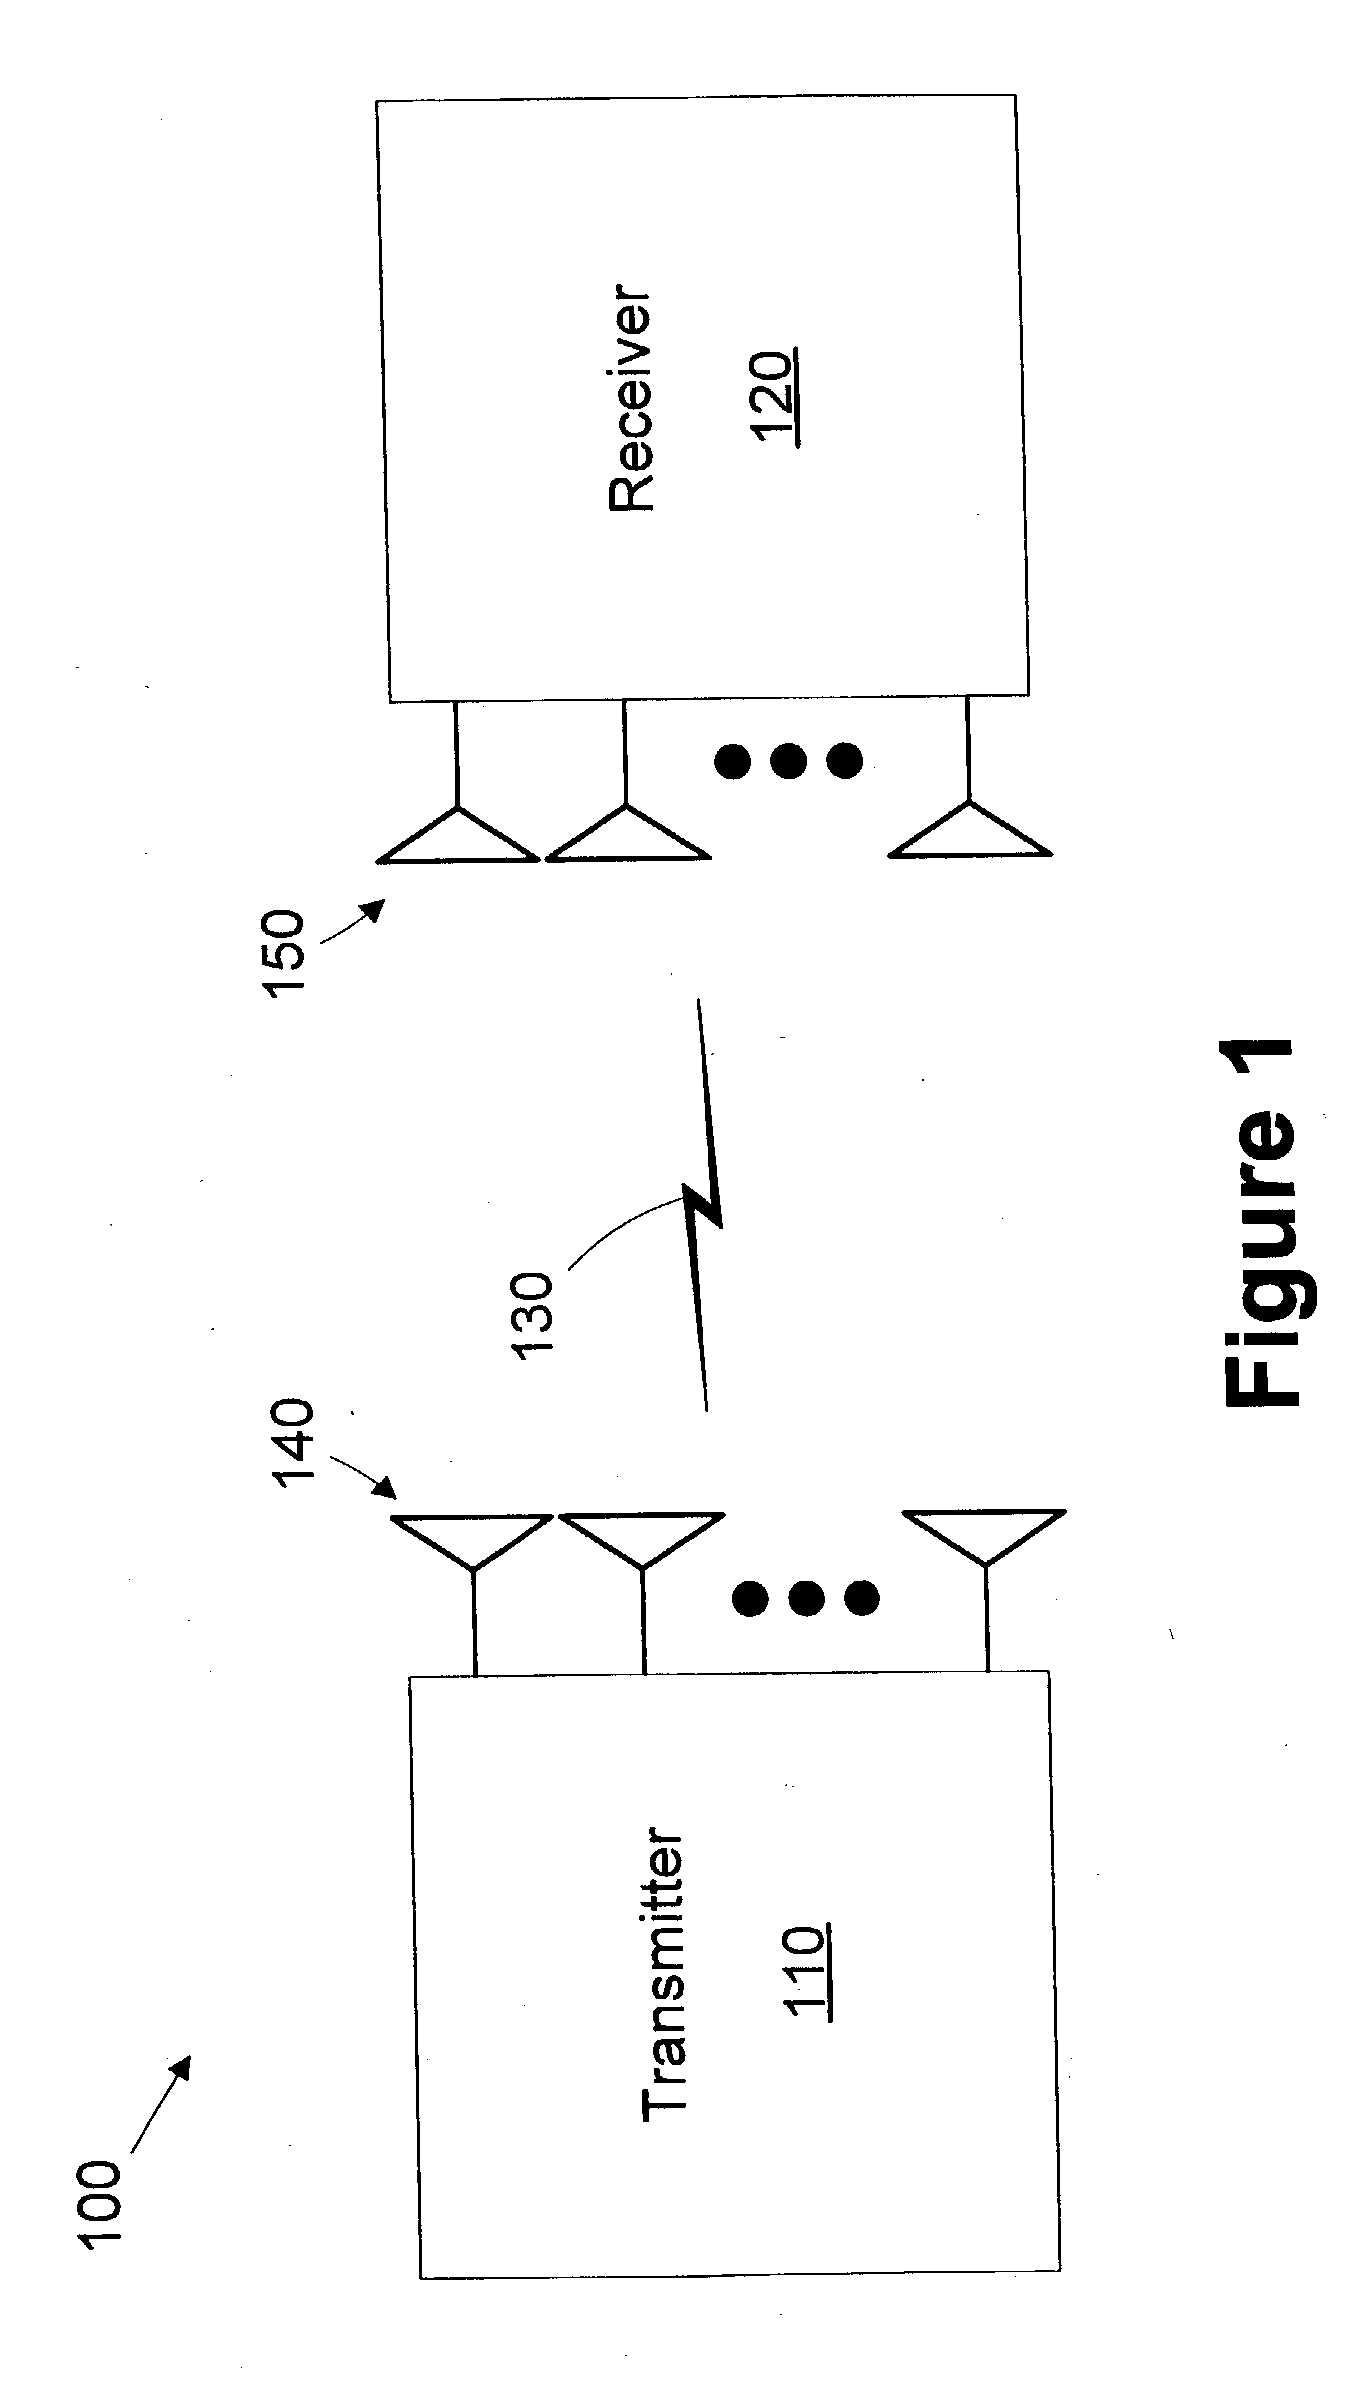 Array processing using an aggregate channel matrix generated using a block code structure